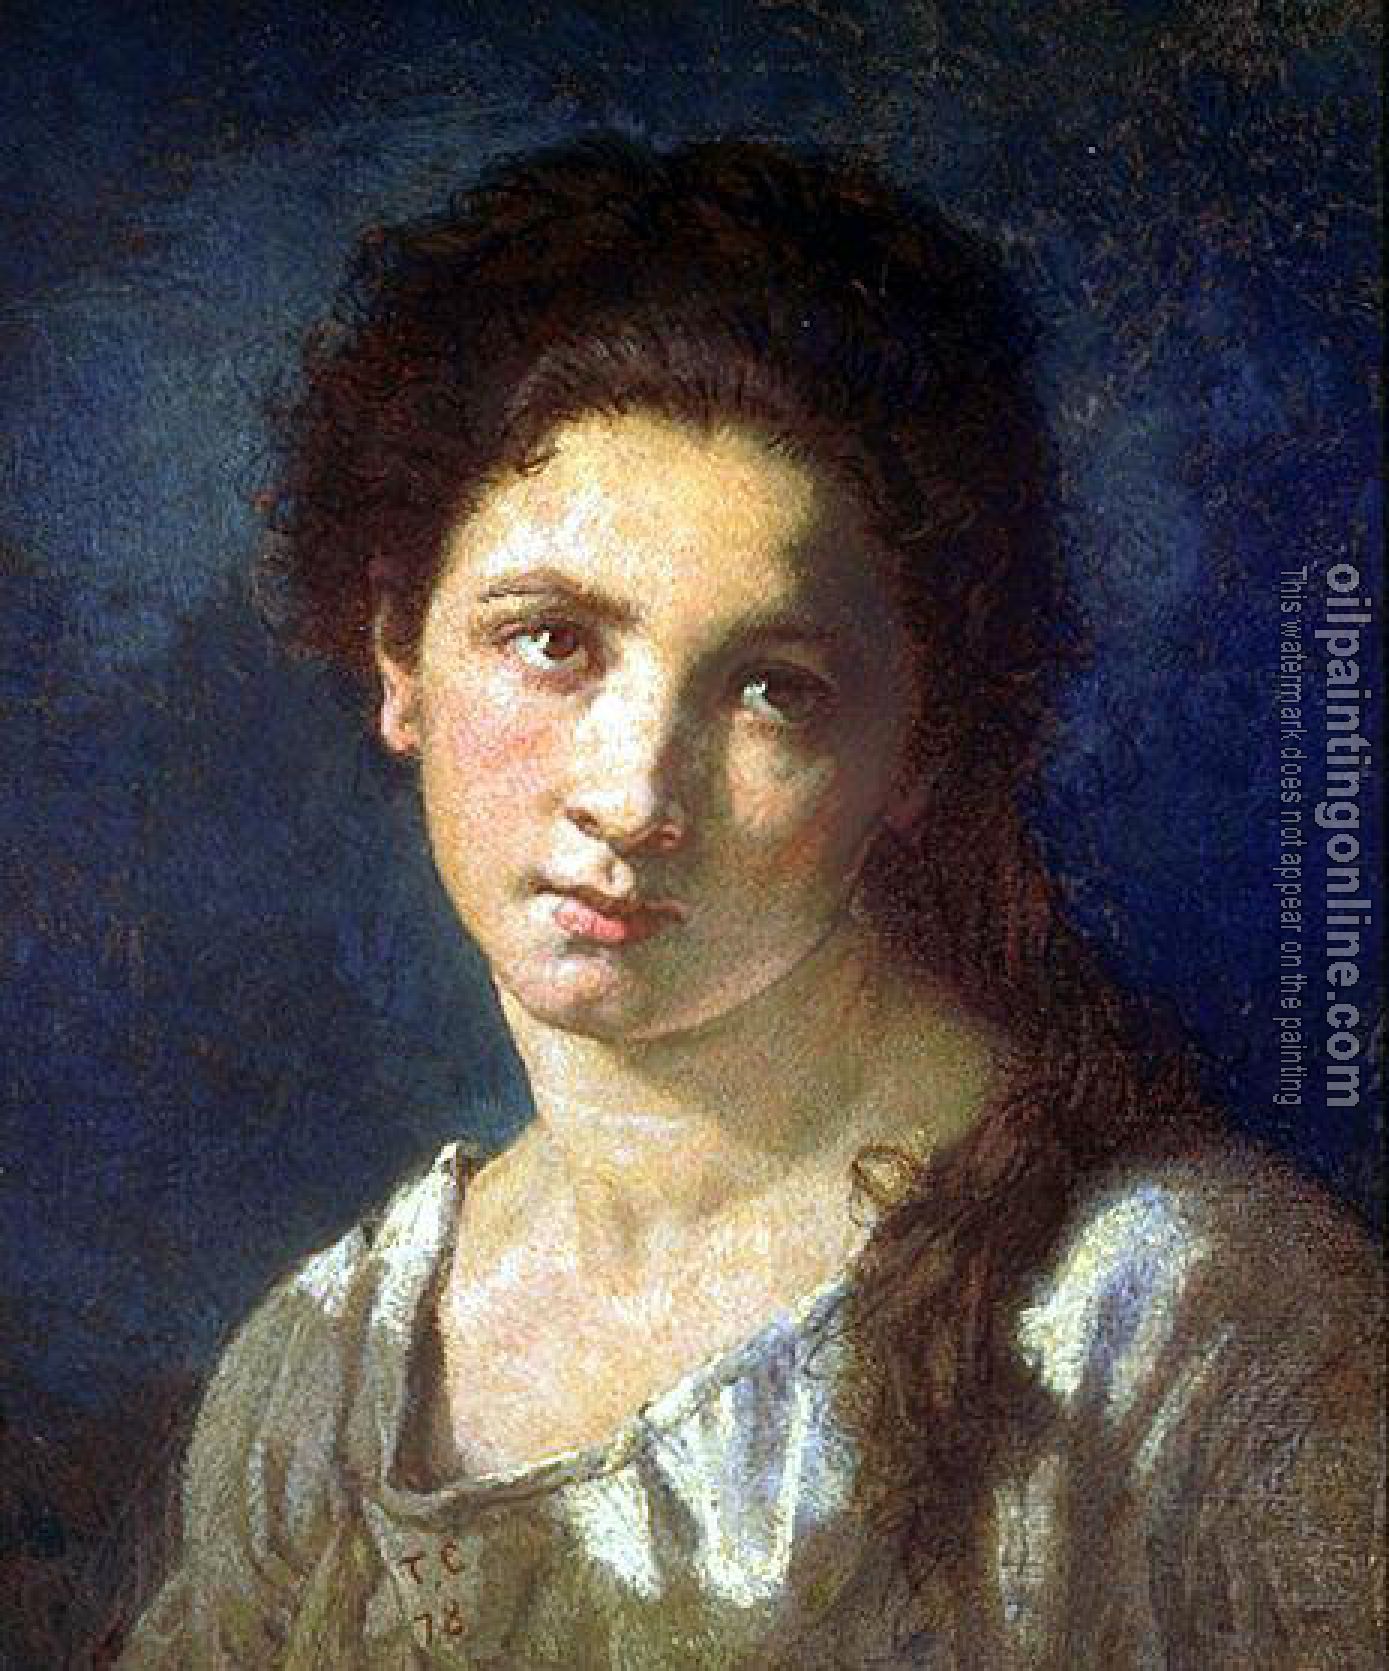 Thomas Couture - The Artist's Daughter